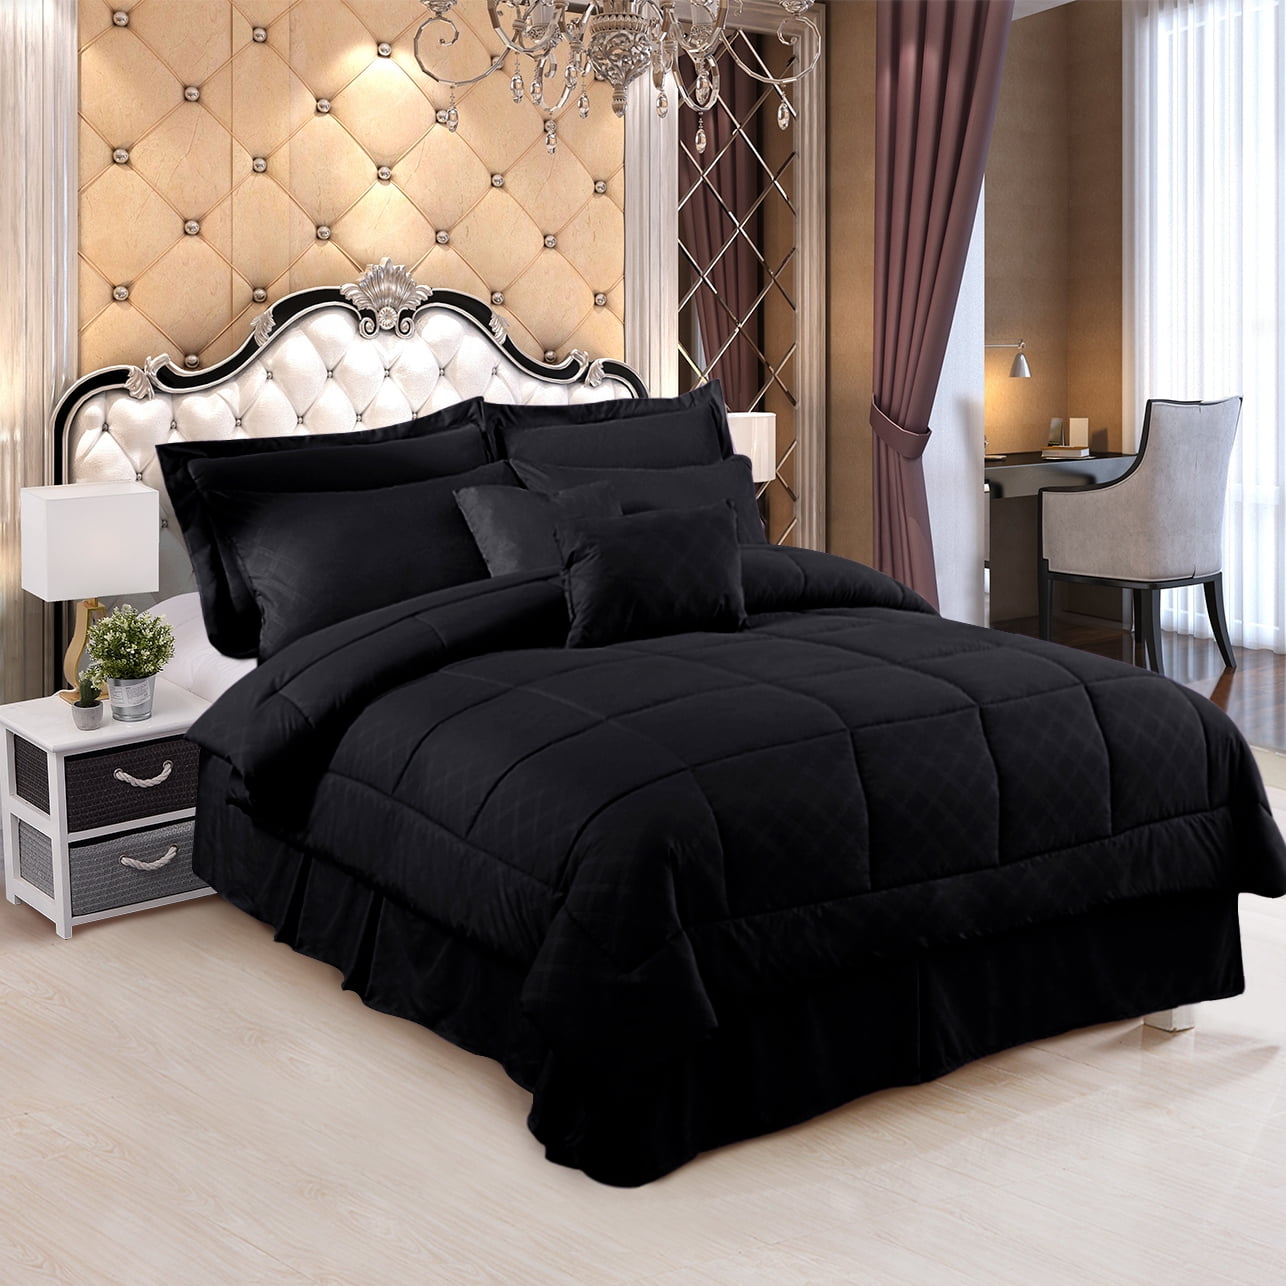 10 Pieces Bed in a Bag Bedding Comforter Set,Quilted Diamond Pattern,Cal  King,Black